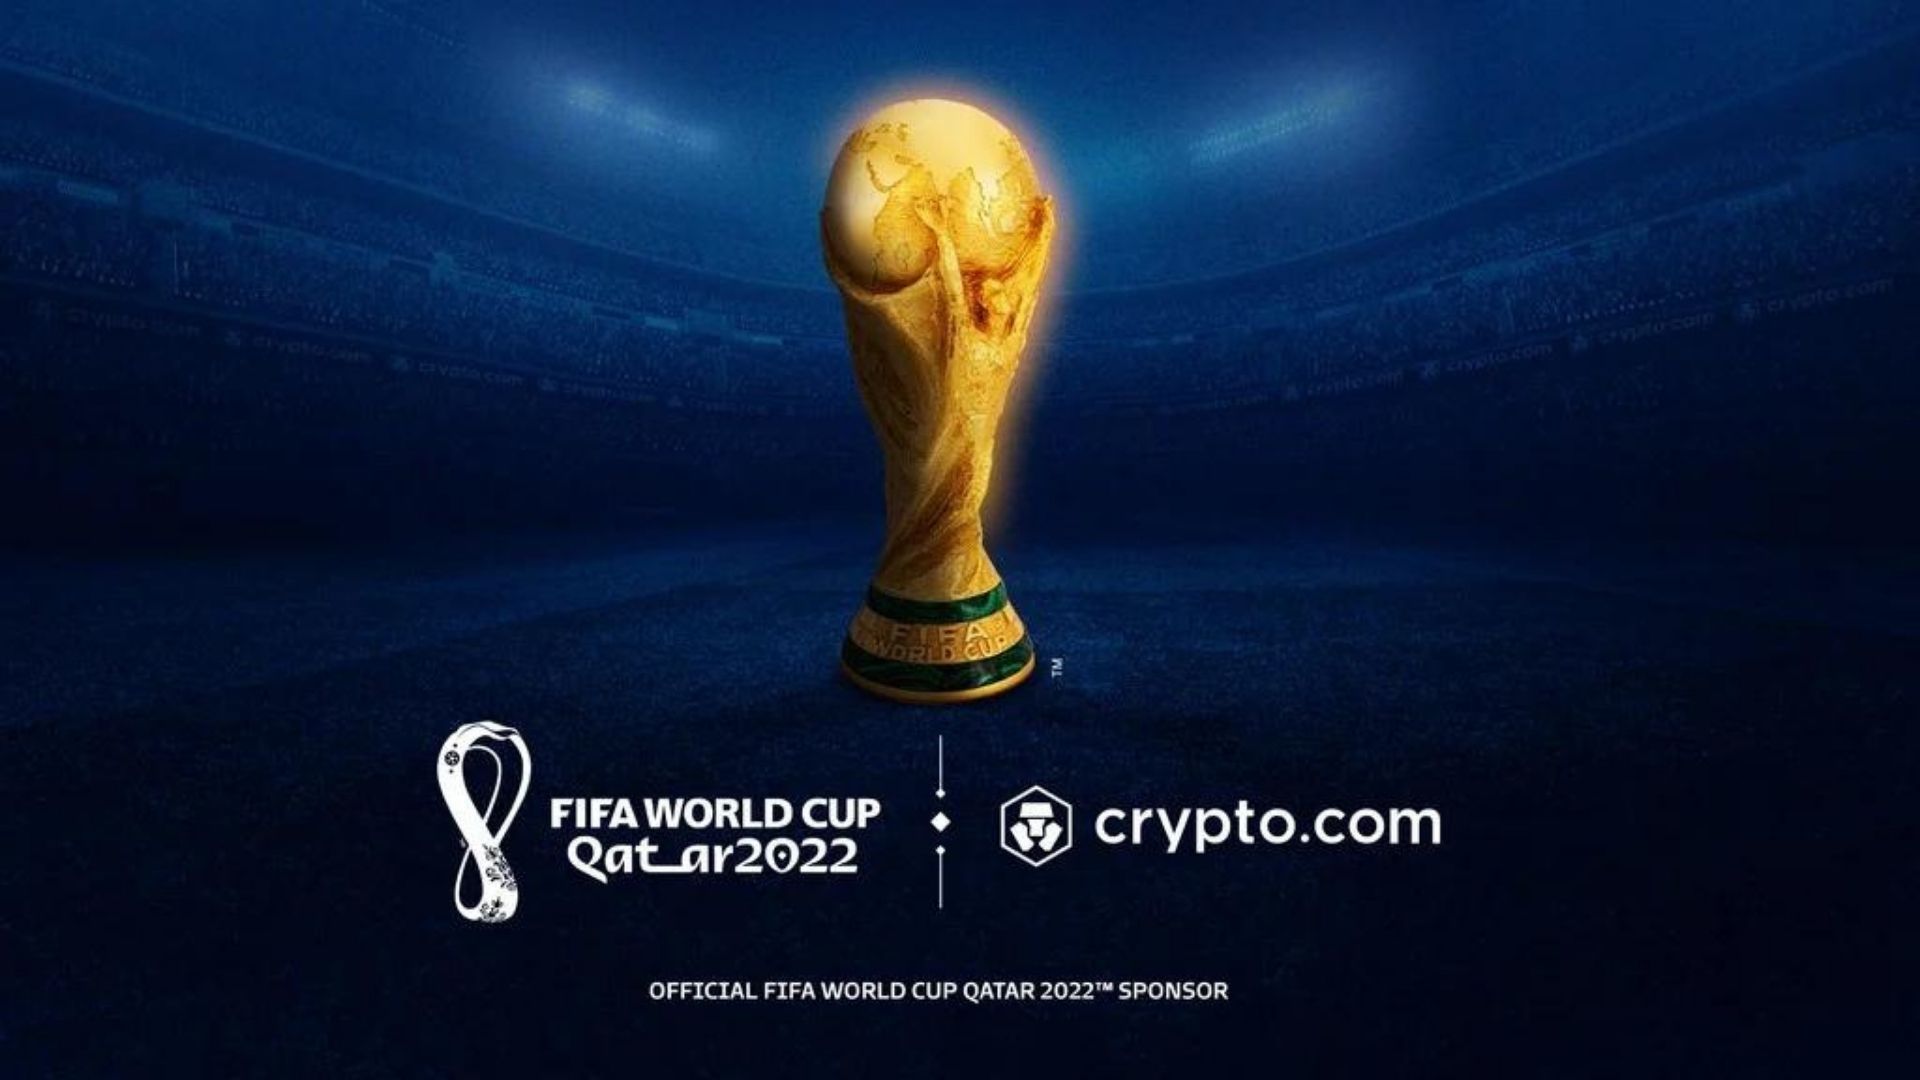 unveiled as an official sponsor for FIFA World Cup Qatar 2022